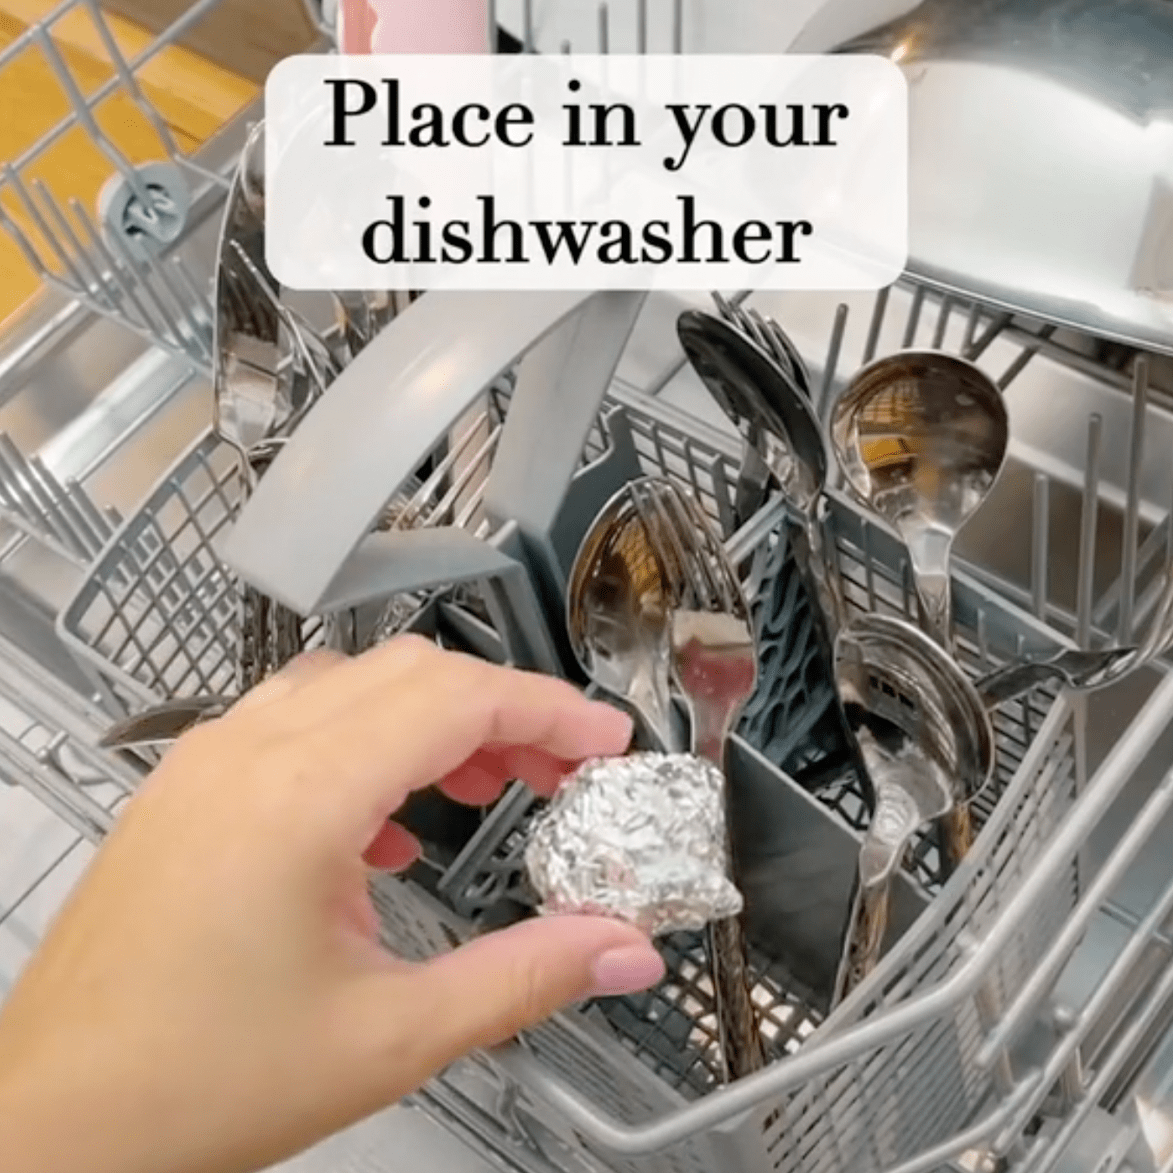 Does Putting Aluminum Foil In Your Dishwasher Work?